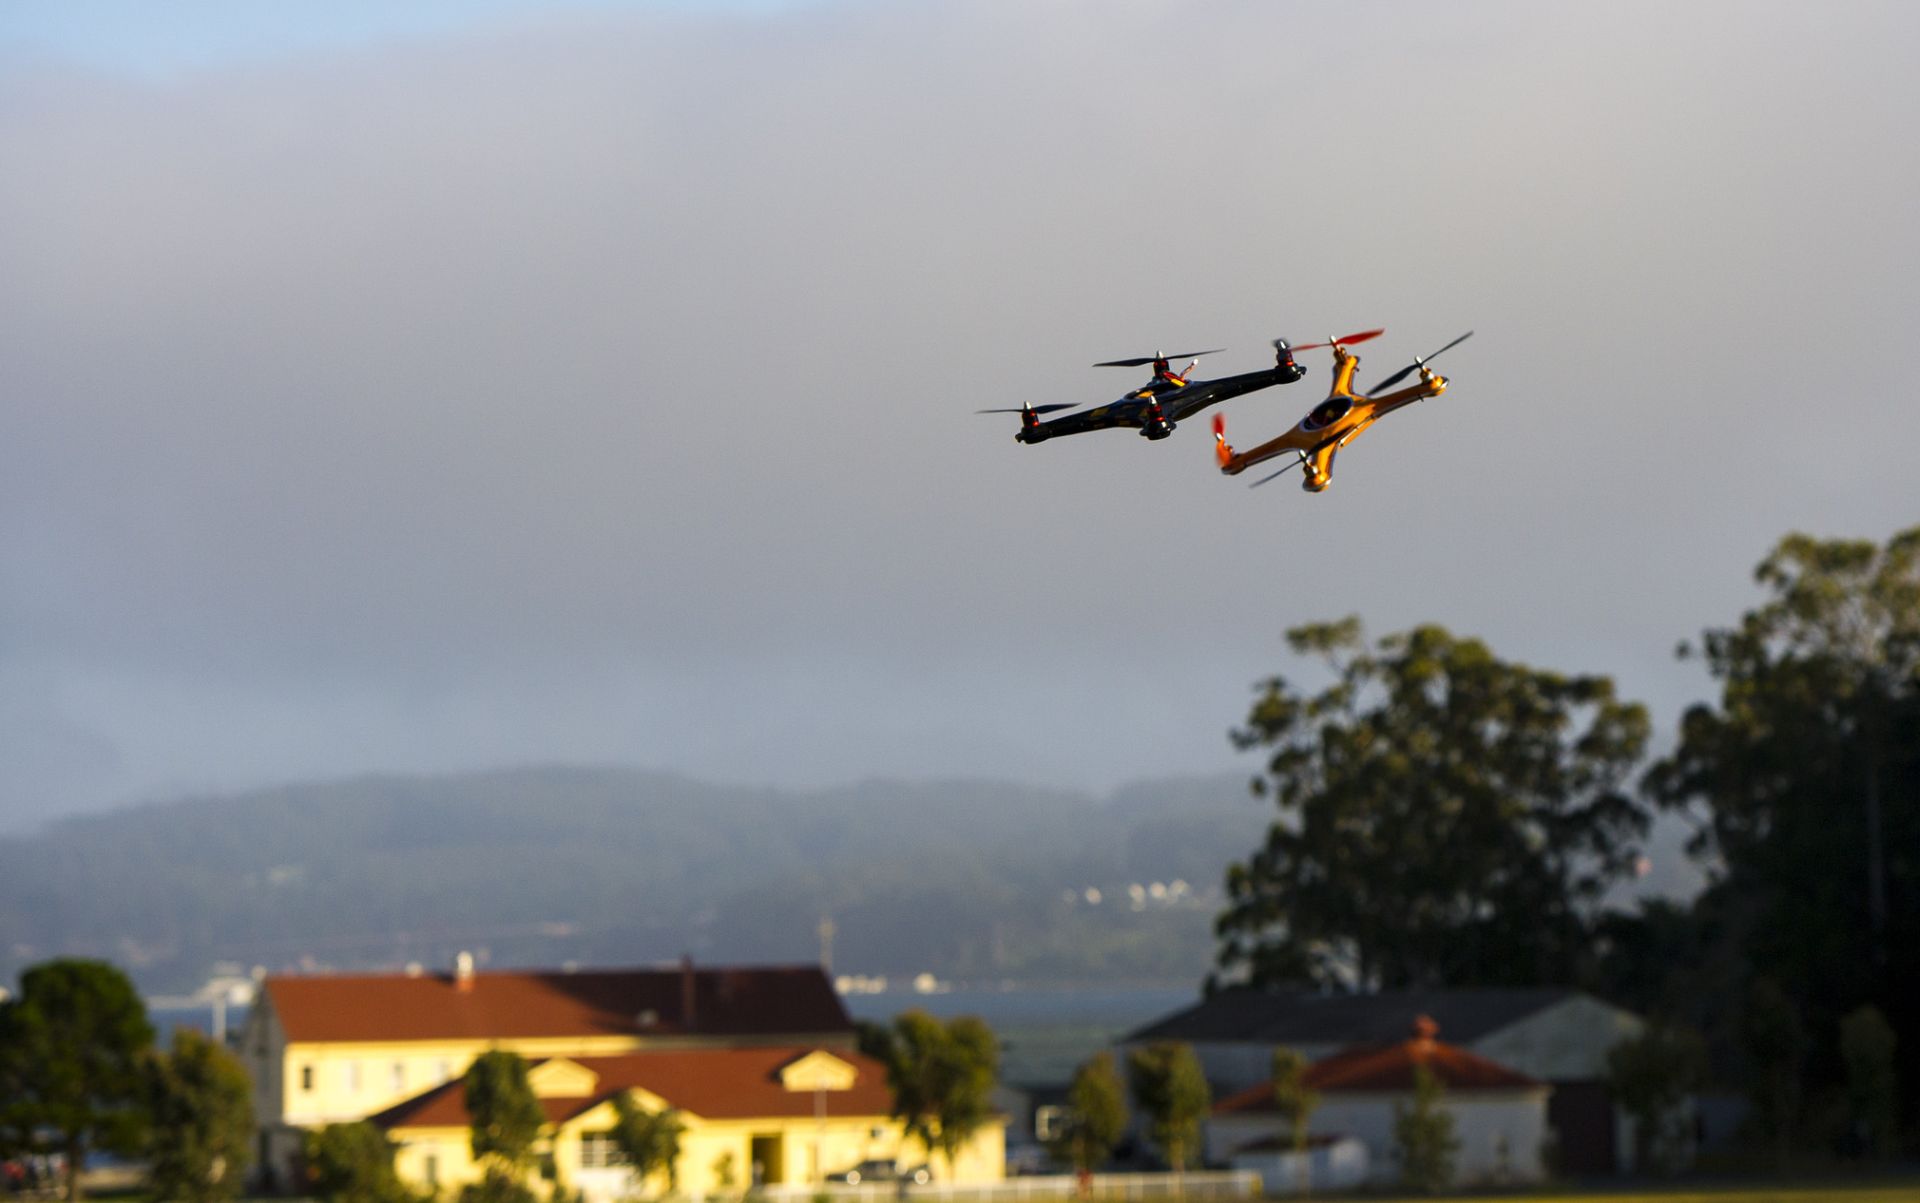 New, Clarified FAA Rules Benefit both Makers and Users of Small Drones